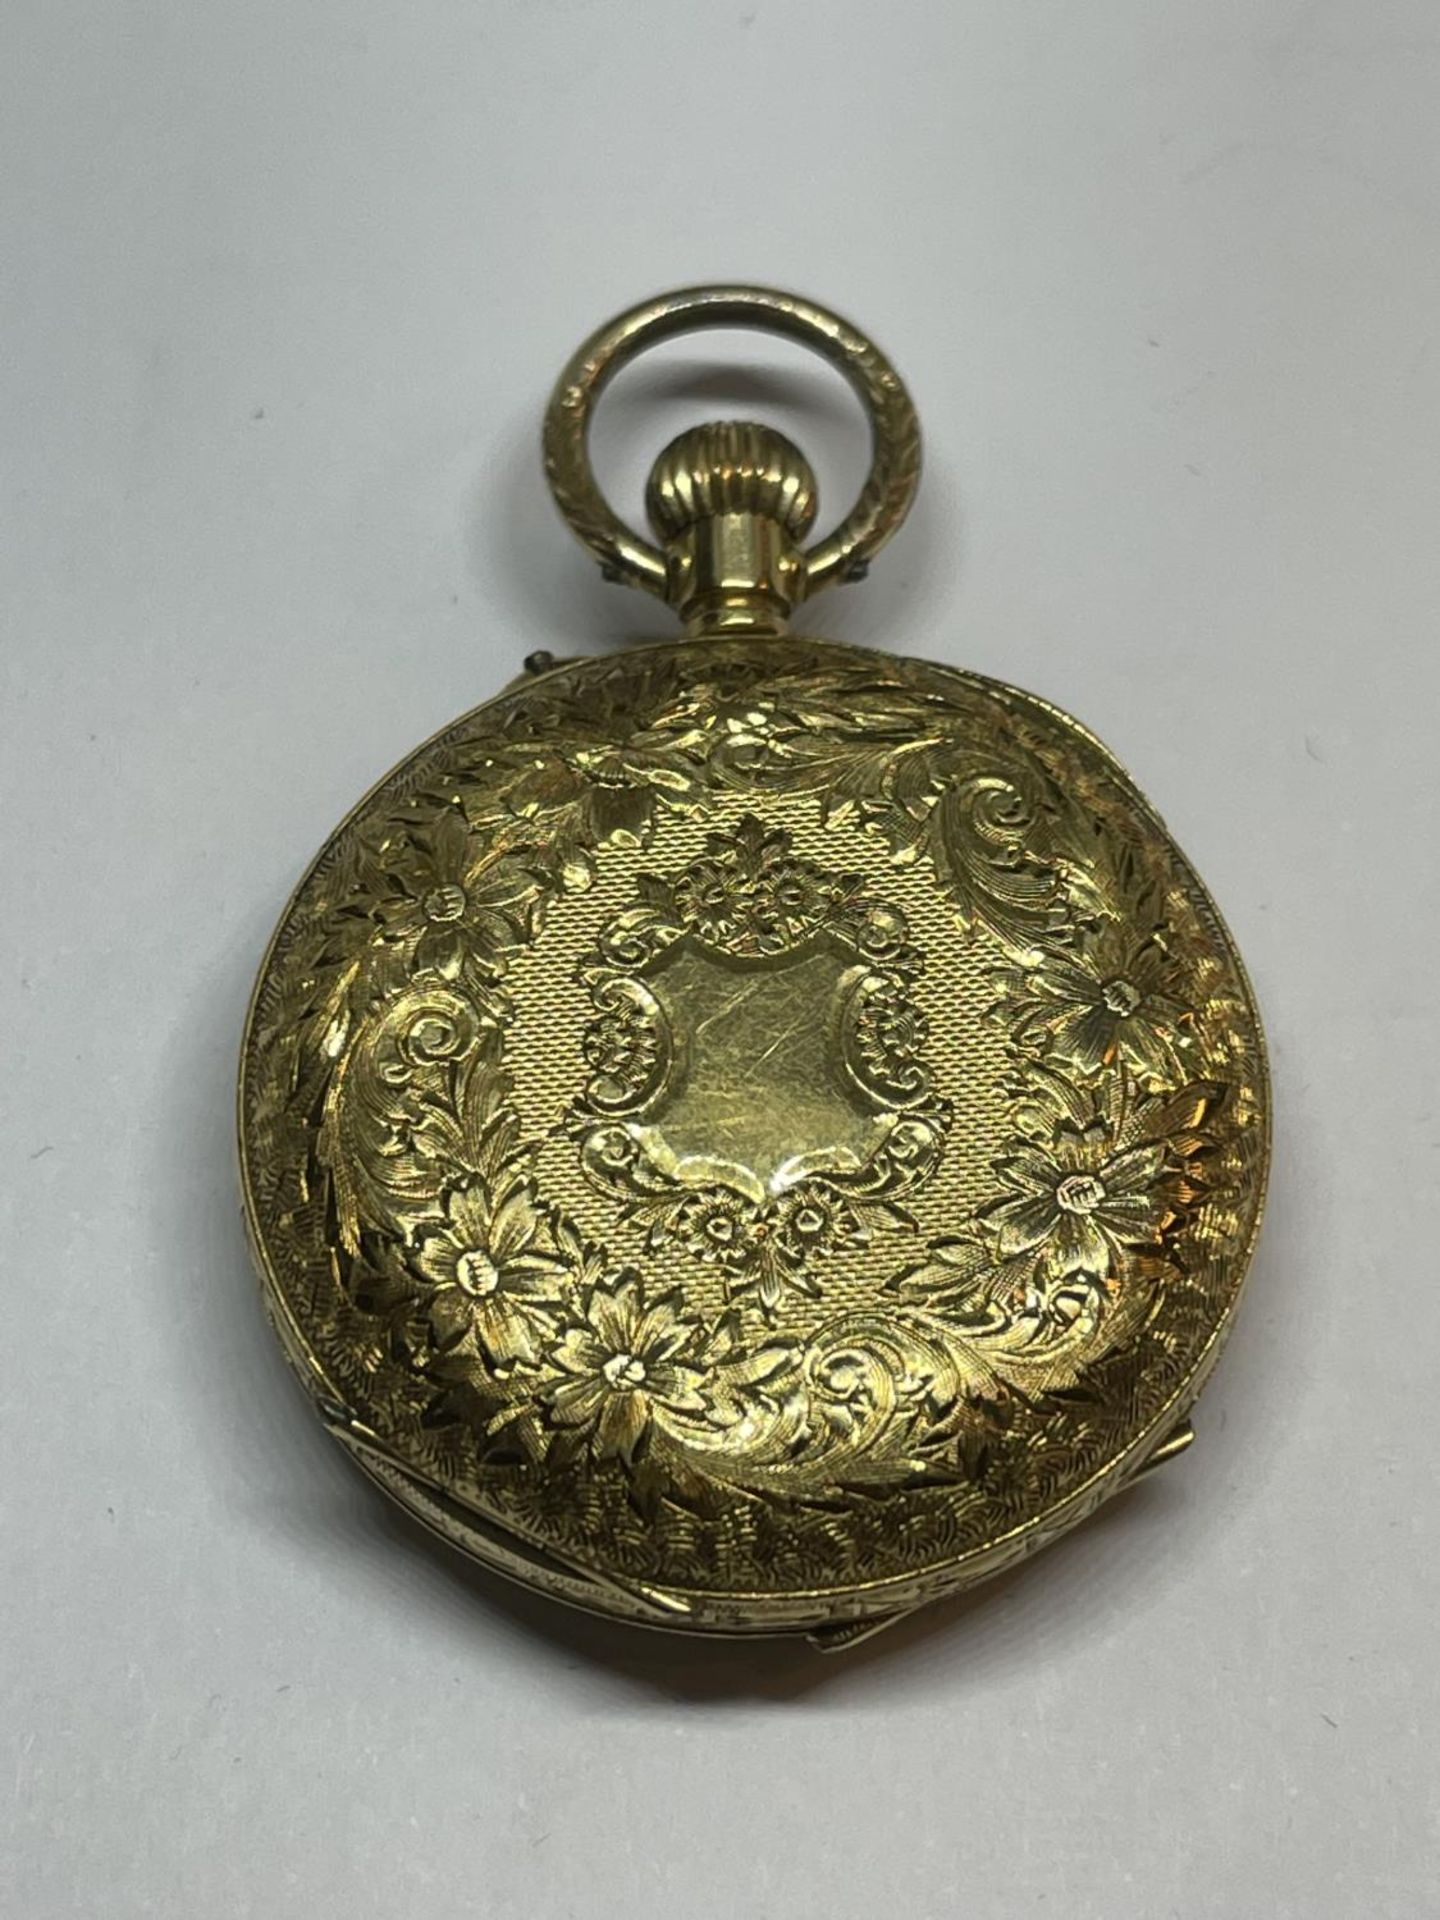 AN 18CT GOLD TOP WIND POCKET WATCH WITH WHITE ENAMELLED DIAL AND GOLD HANDS, WITH ORIGINAL BOX - Image 4 of 7